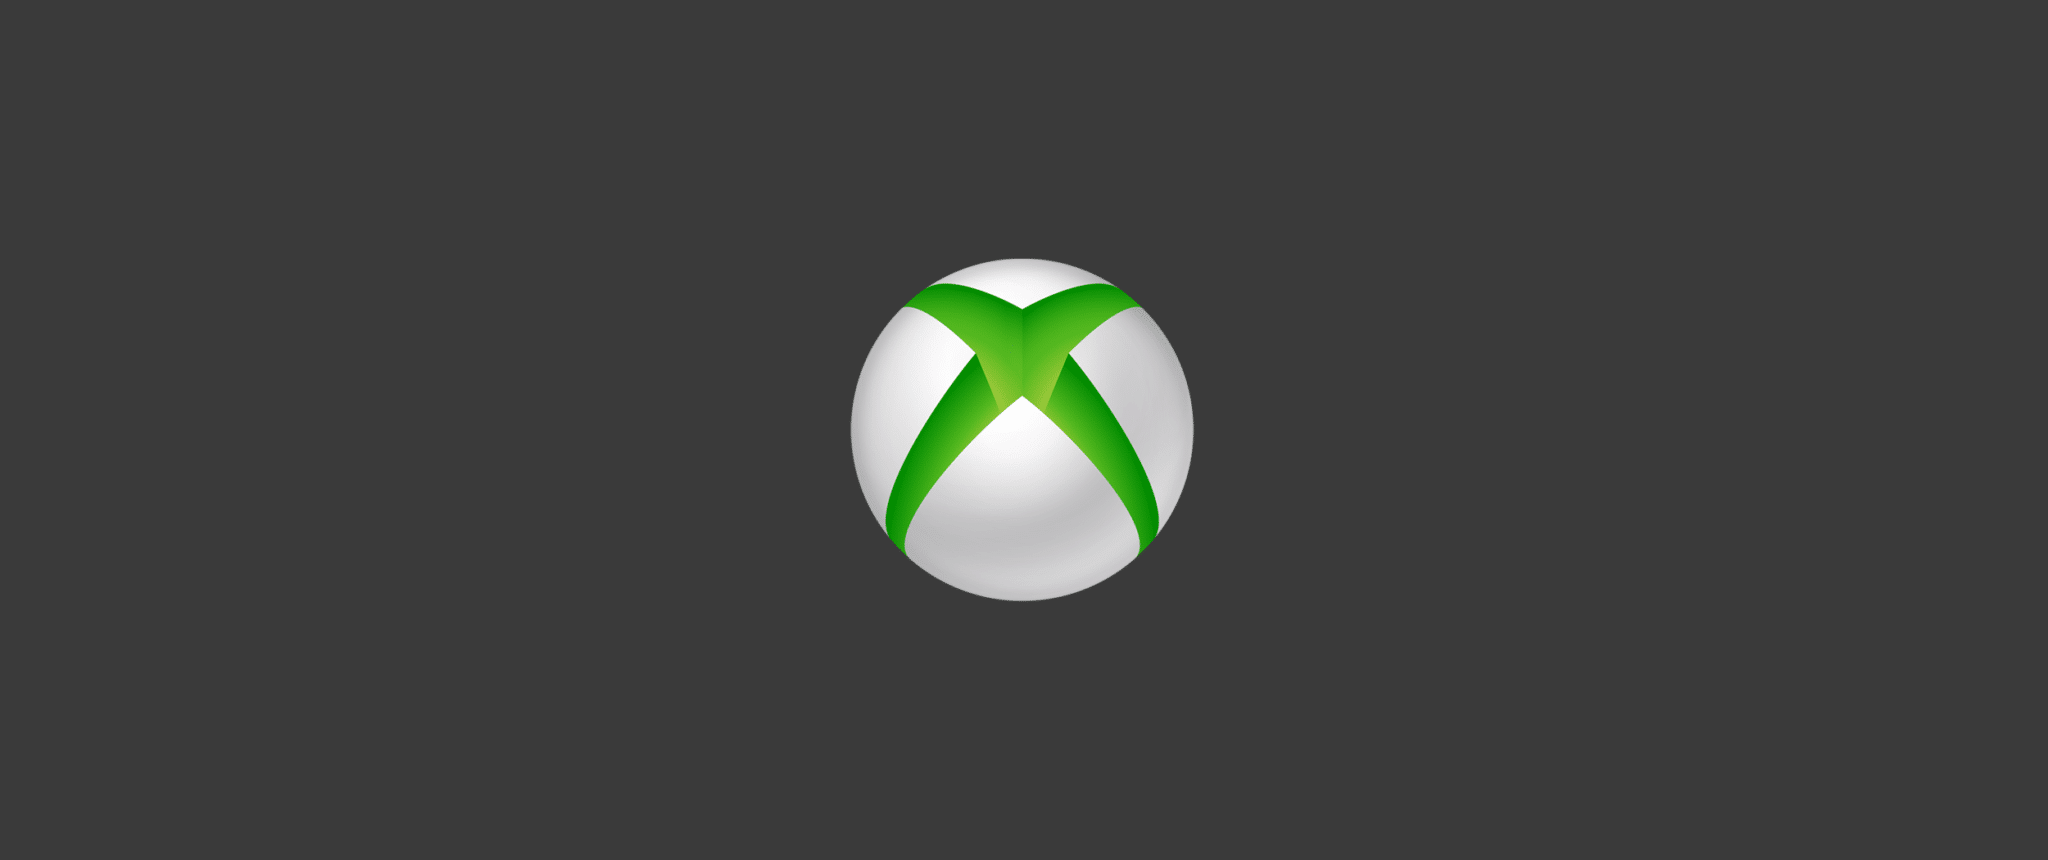 Windows 10 Users Report Issues With Xbox Game Bar